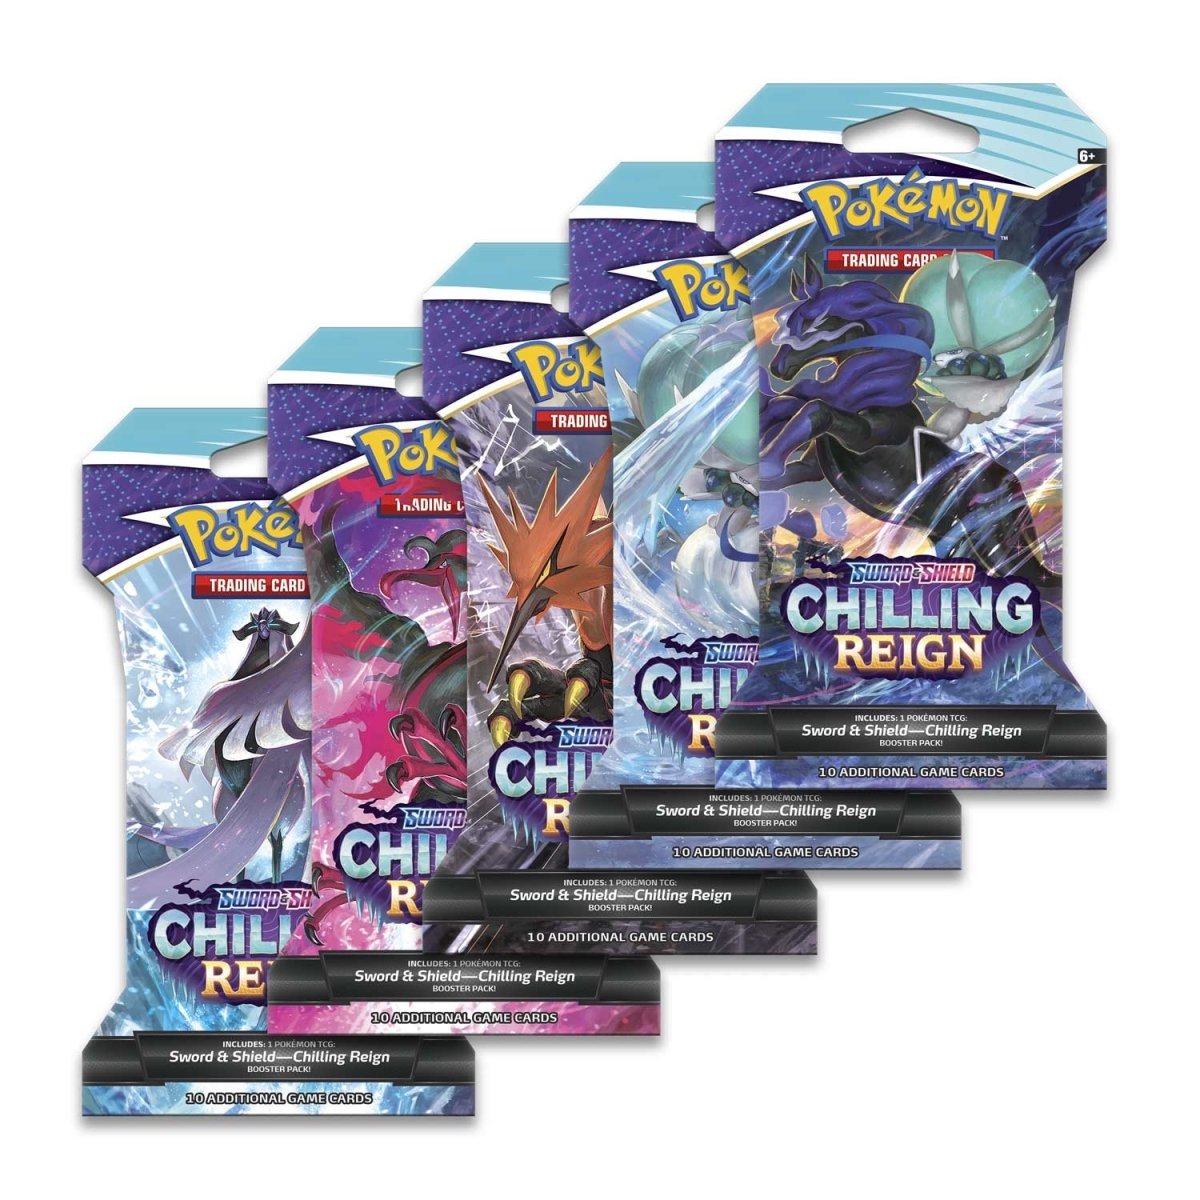 SWSH Chilling Reign Pokémon TCG Online - Code Card – Cup of Cards